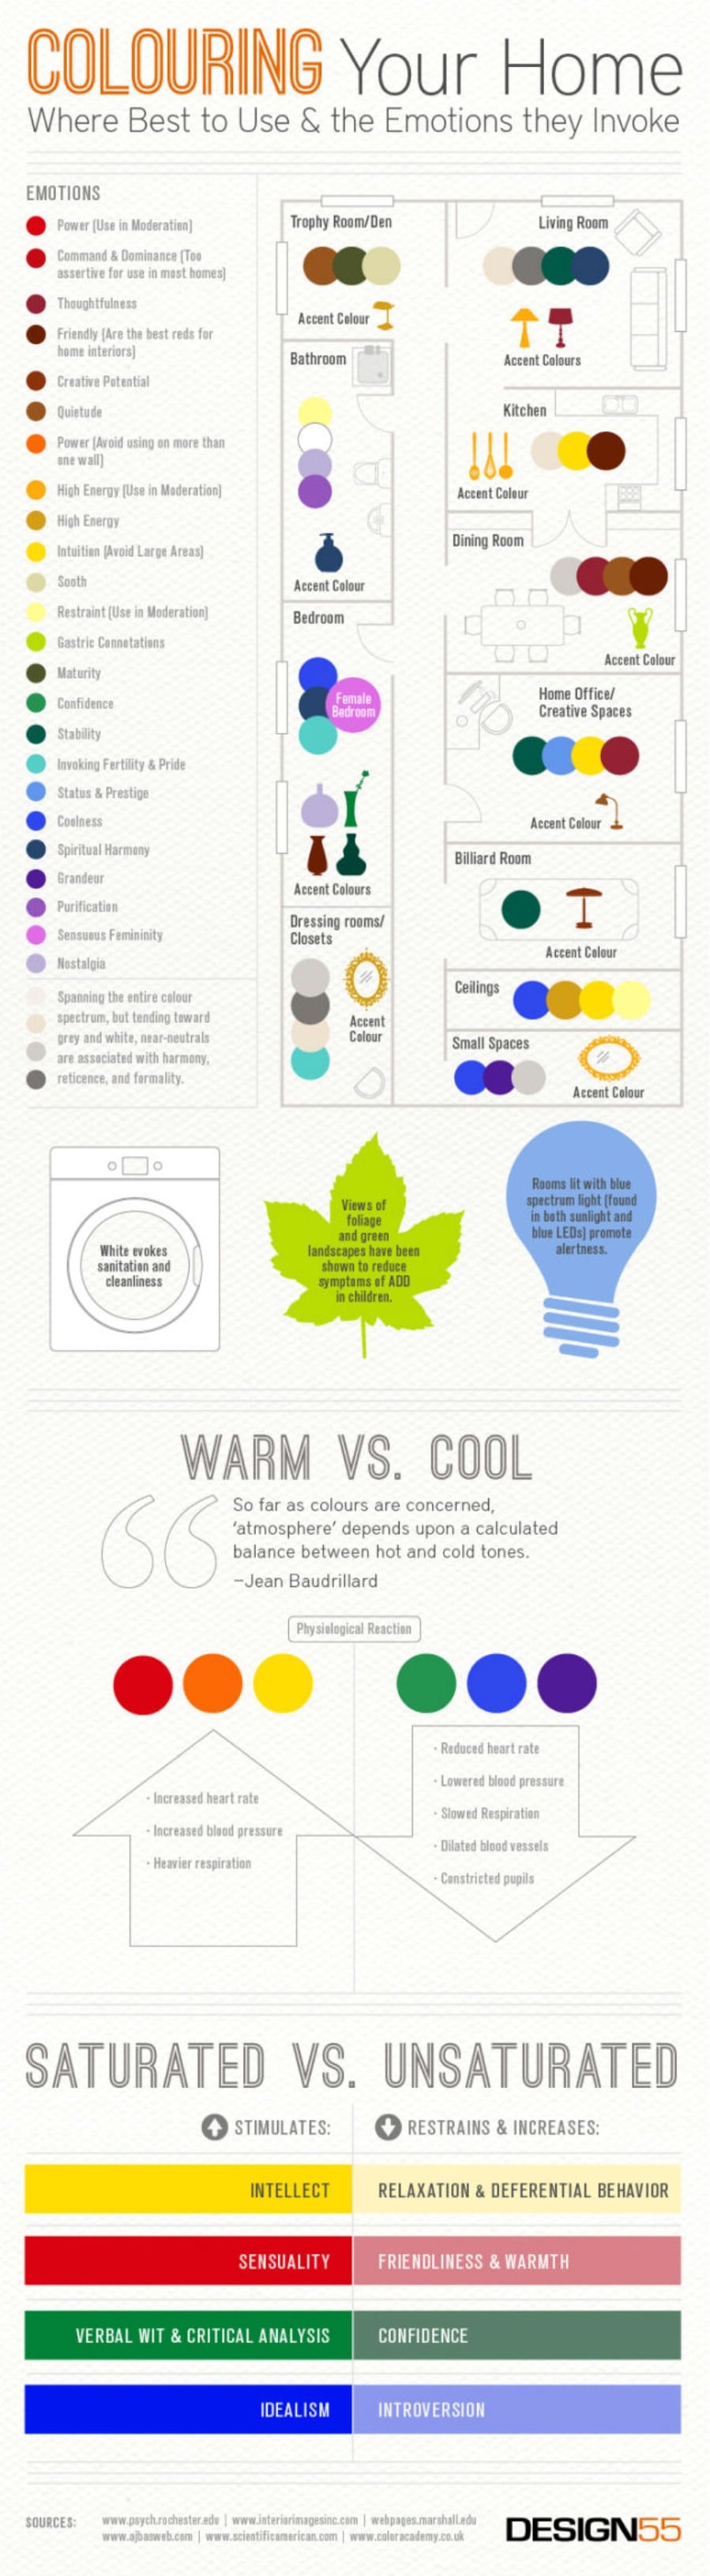 45. Coloring Your Home - Color Emotional Meanings - 50 Amazingly Clever Cheat Sheets To Simplify Home Decorating Projects